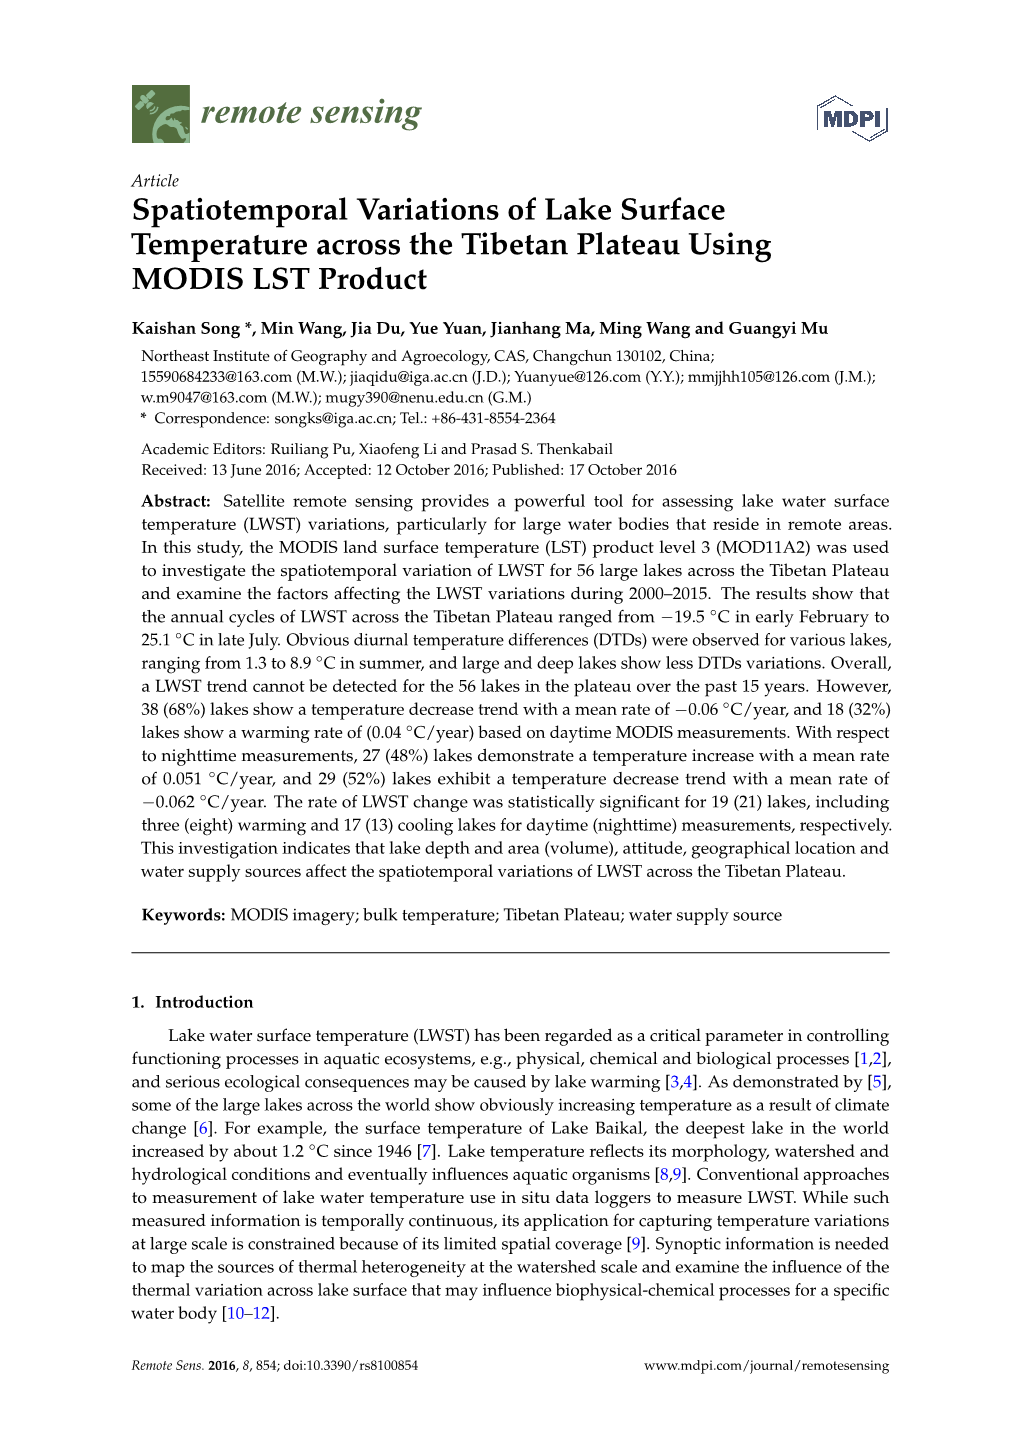 Spatiotemporal Variations of Lake Surface Temperature Across the Tibetan Plateau Using MODIS LST Product